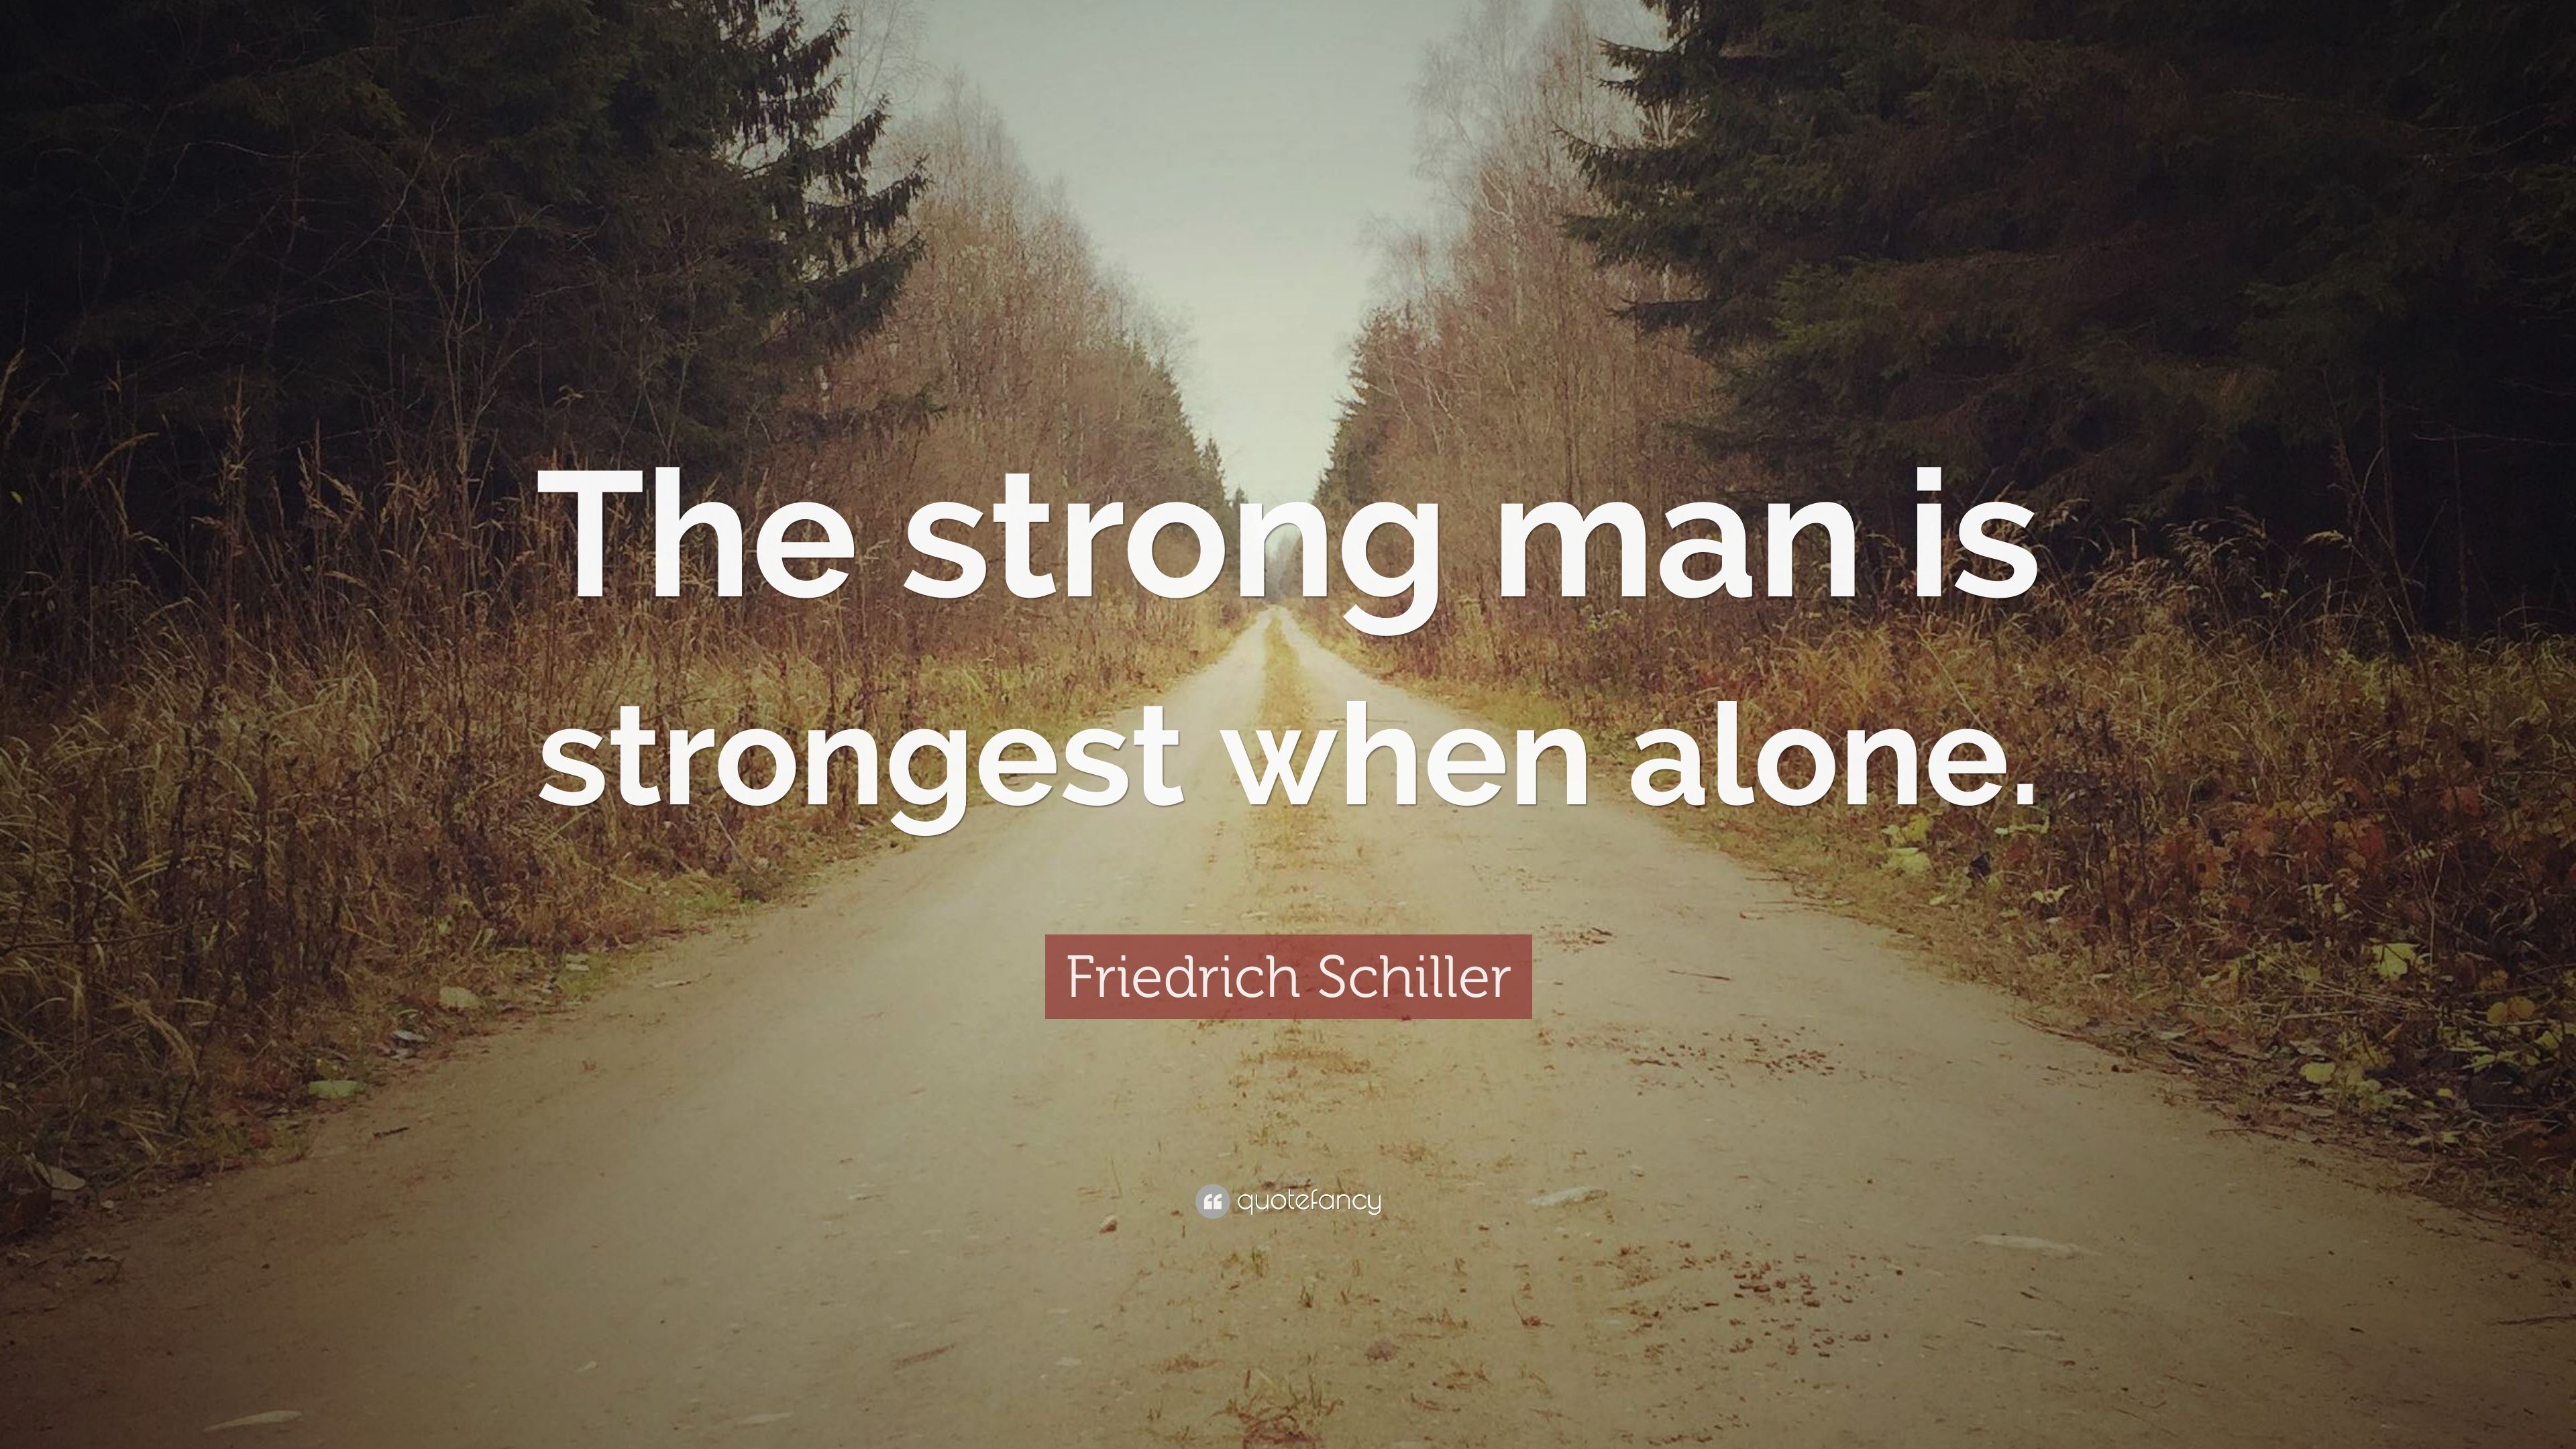 Friedrich Schiller Quote: “The strong man is strongest when alone